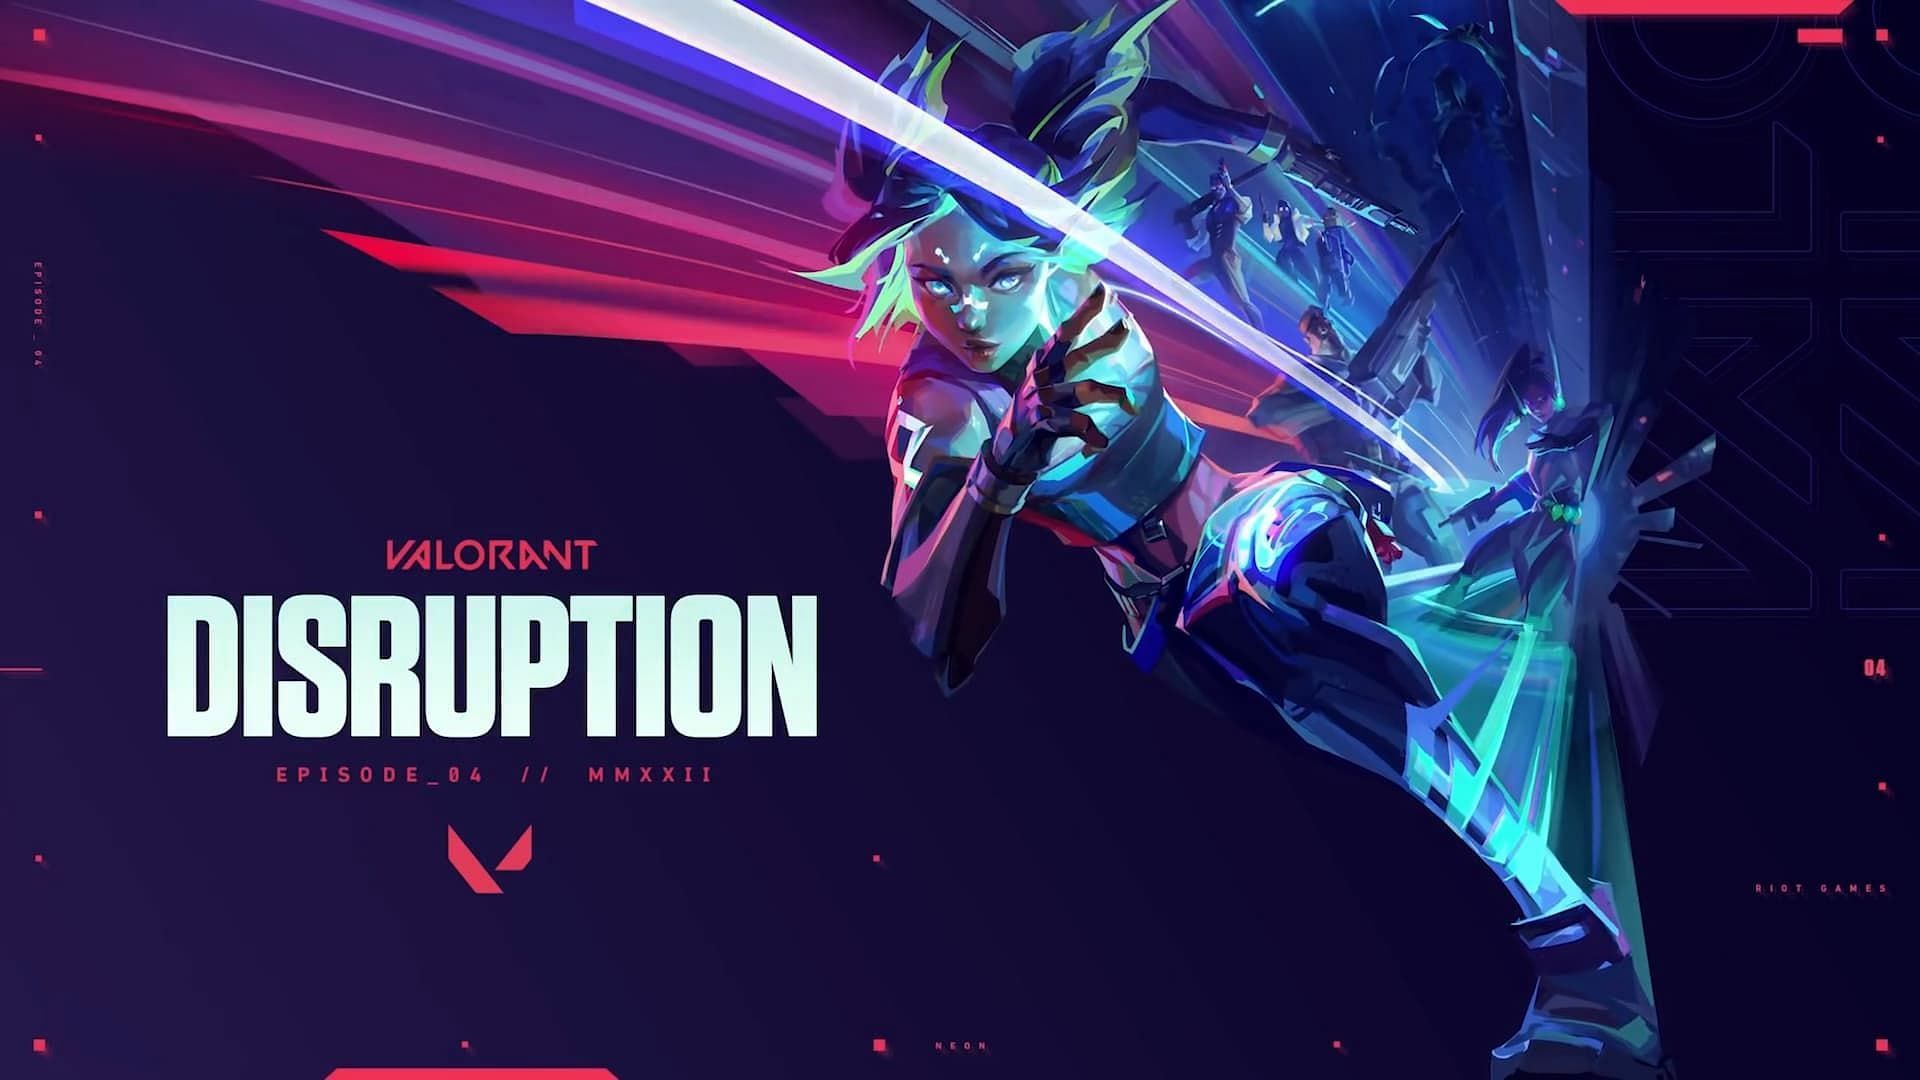 The Disruption player card can now be earned in Valorant (Image via Riot)